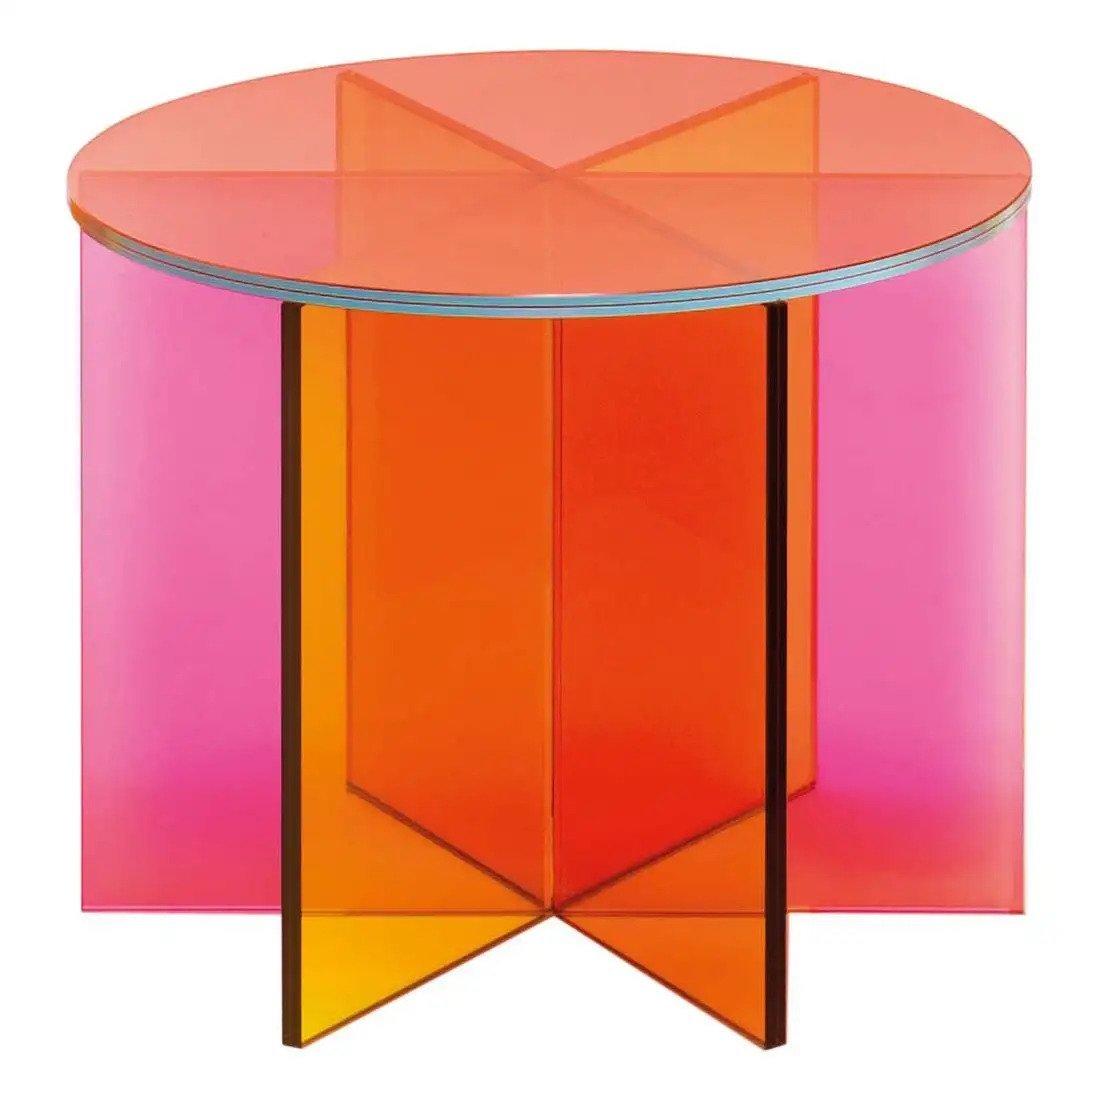 Full transparency: 9 acrylic furniture pieces that will have you thinking clearly